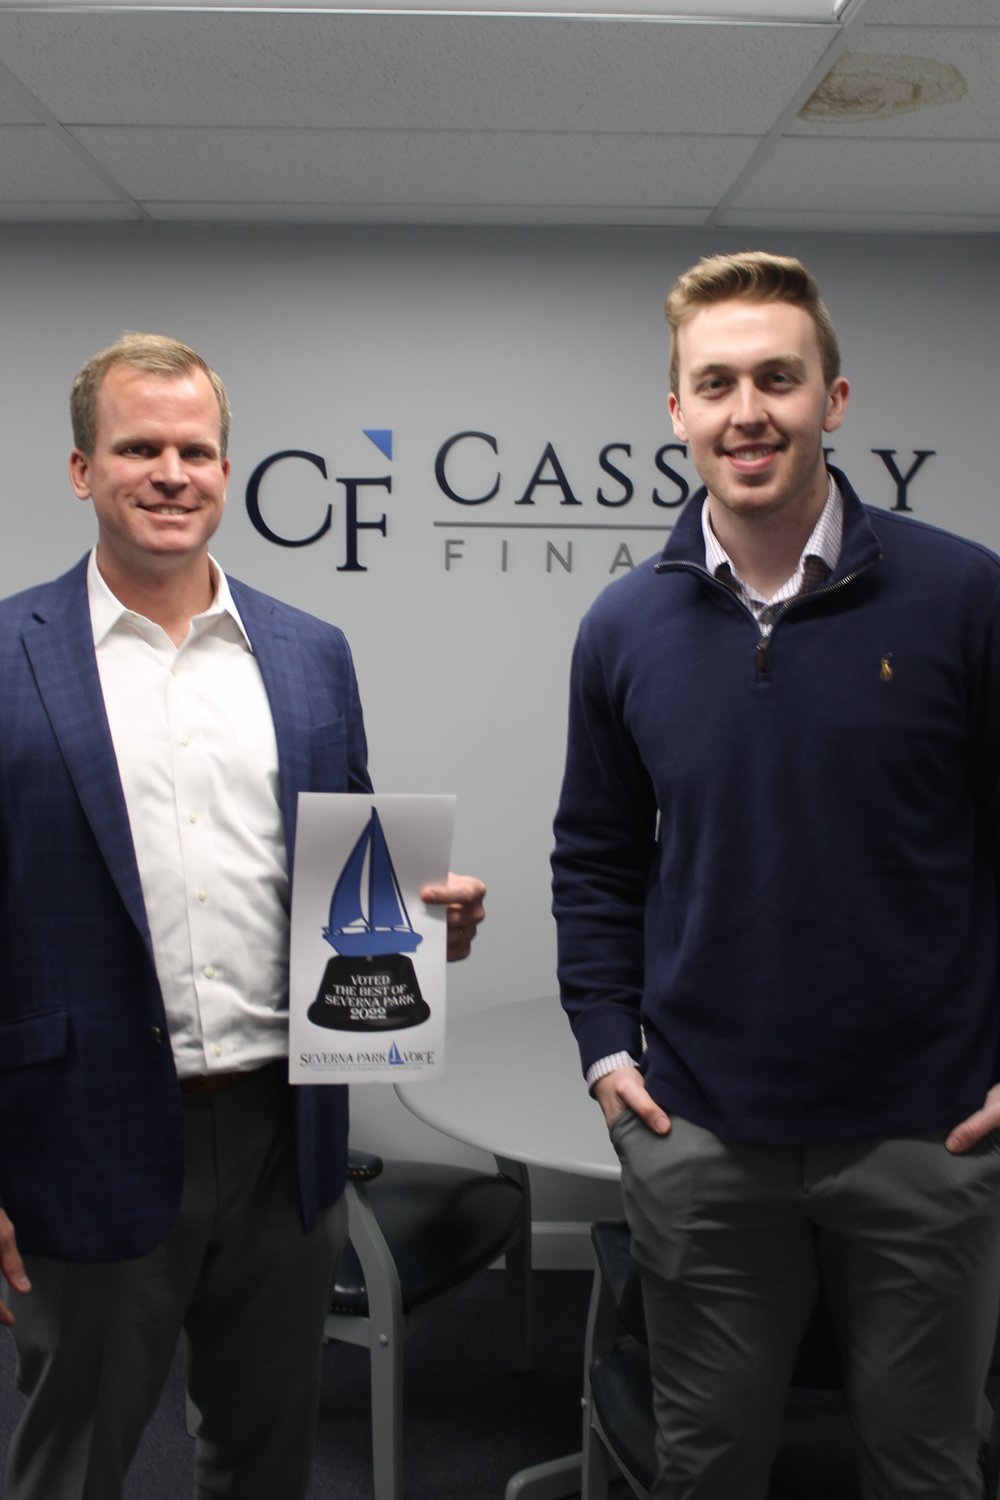 Freddie Cassilly (left) and David Bauer of Cassilly Financial Services received the honor of runner-up for Best Investment Advisor.